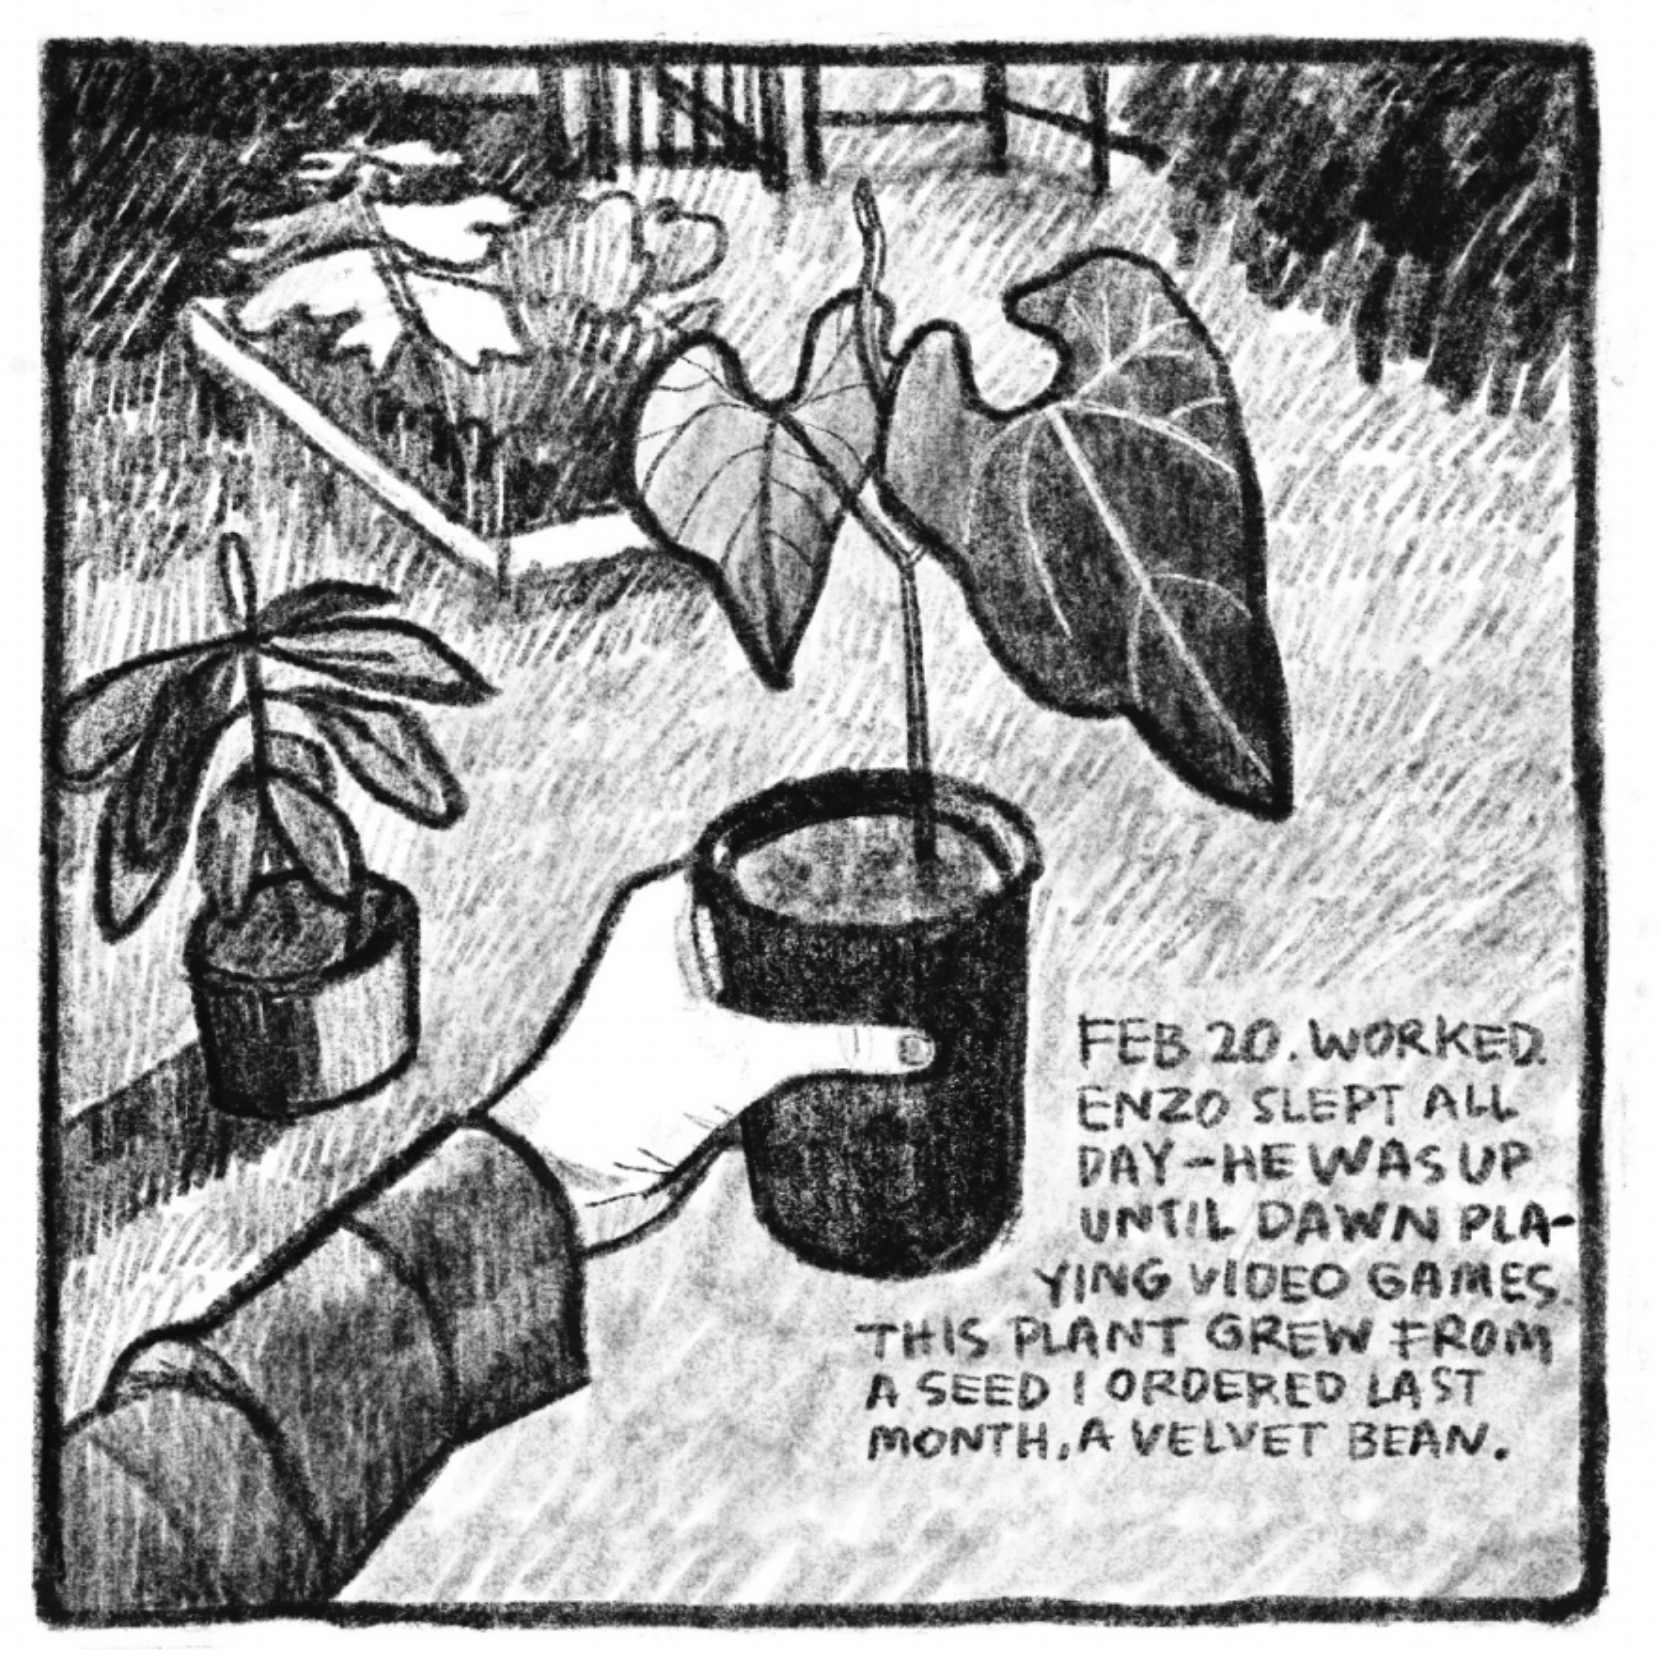 Hold Still Episode 9, Panel 4
Drawing of a hand holding a potted plant. 
Lower left corner reads: "FEB 20. WORKED. ENZO SLEPT ALL DAY - HE WAS UP UNTIL DAWN PLAYING VIDEO GAMES. THIS PLANT GREW FROM A SEED I ORDERED LAST MONTH, A VELVET BEAN."